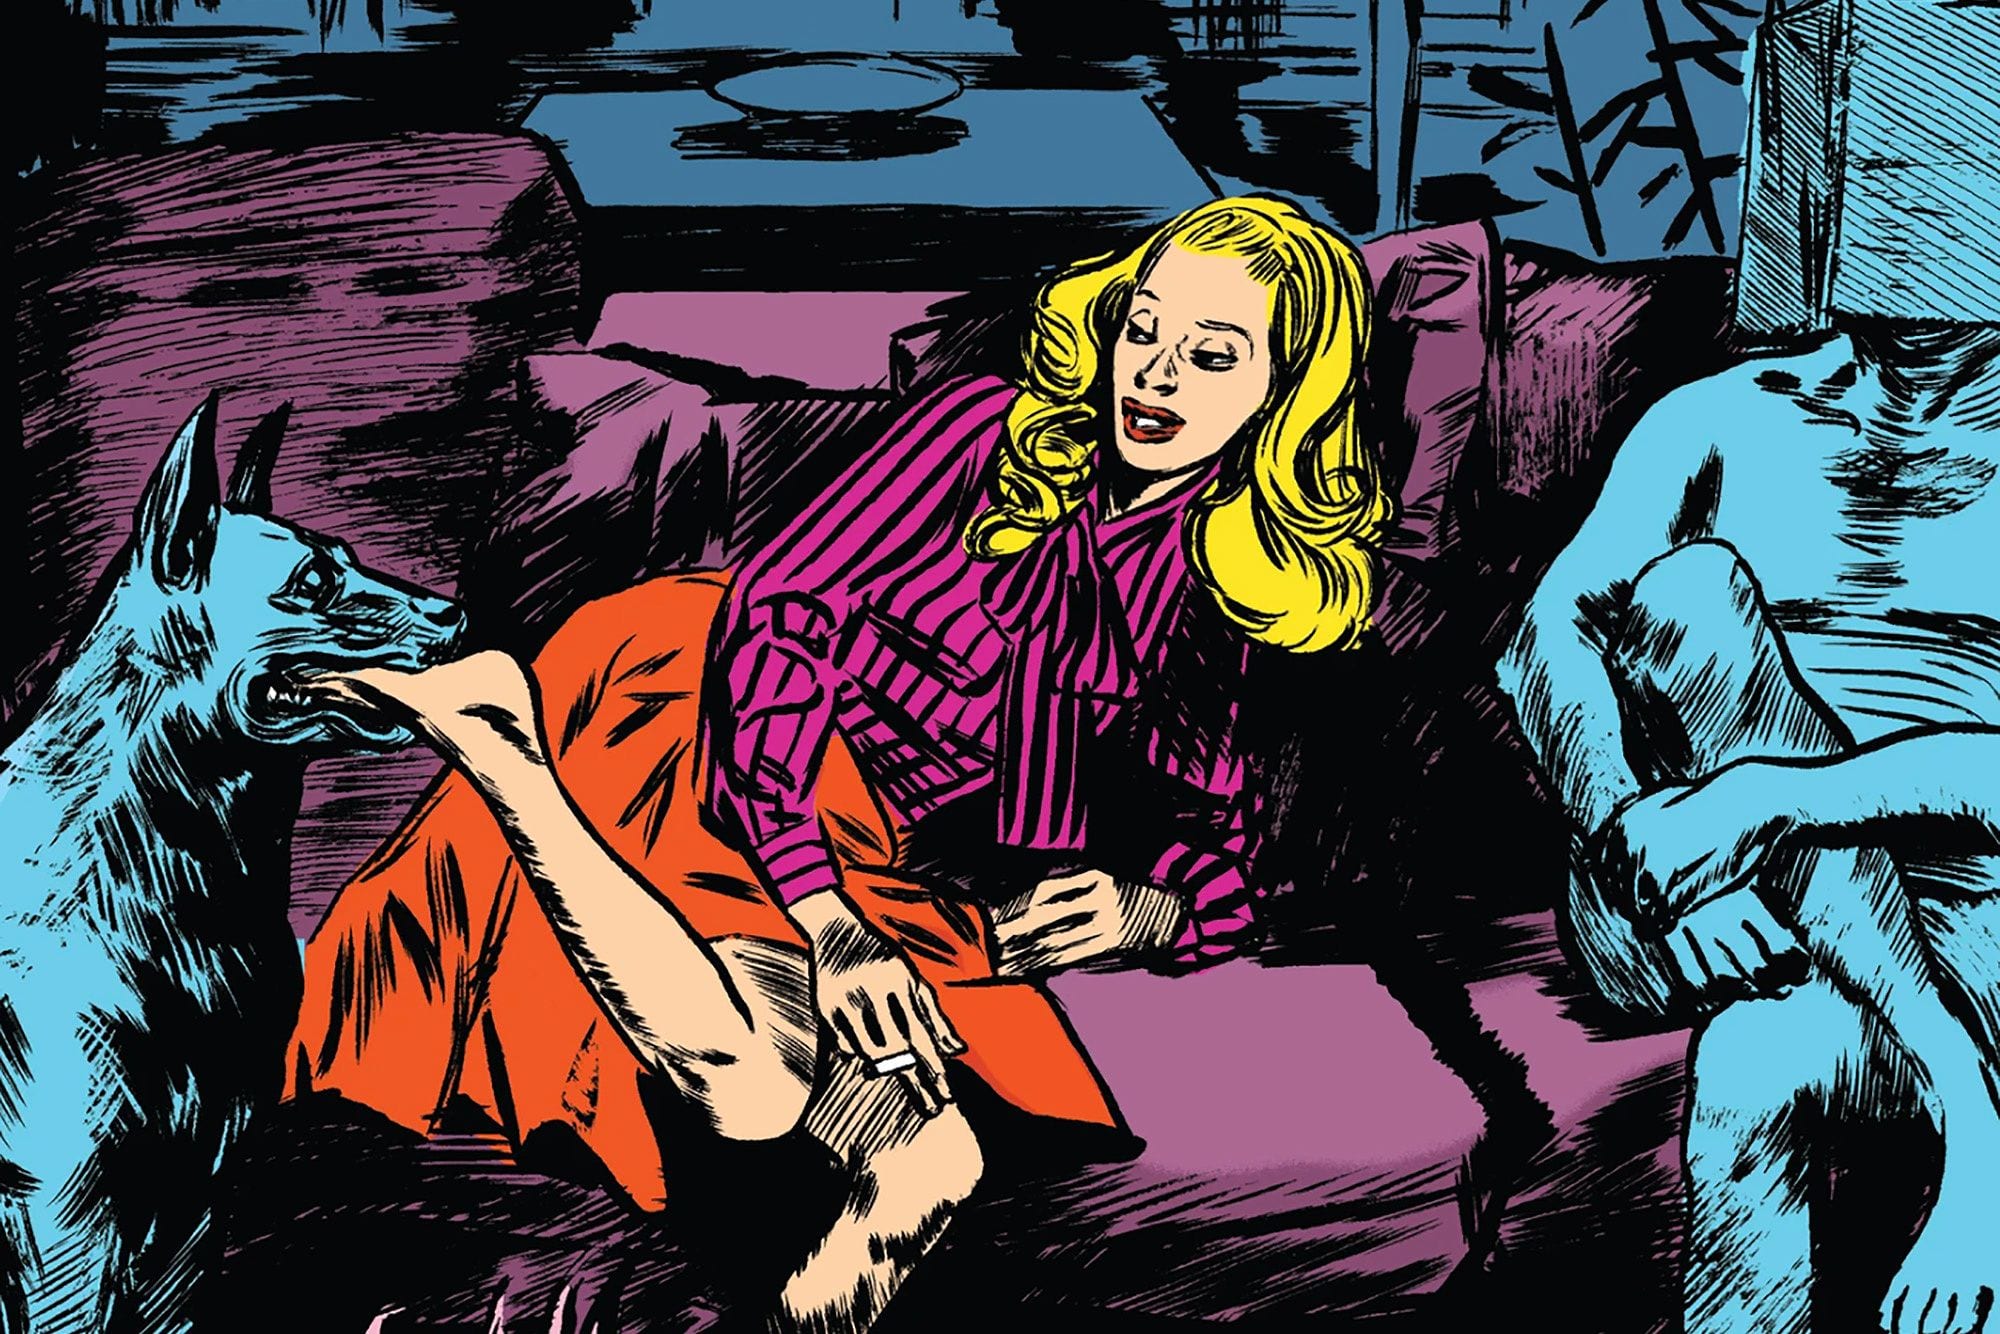 French Comic Artist Blutch Makes an Experiment of ‘Mitchum’